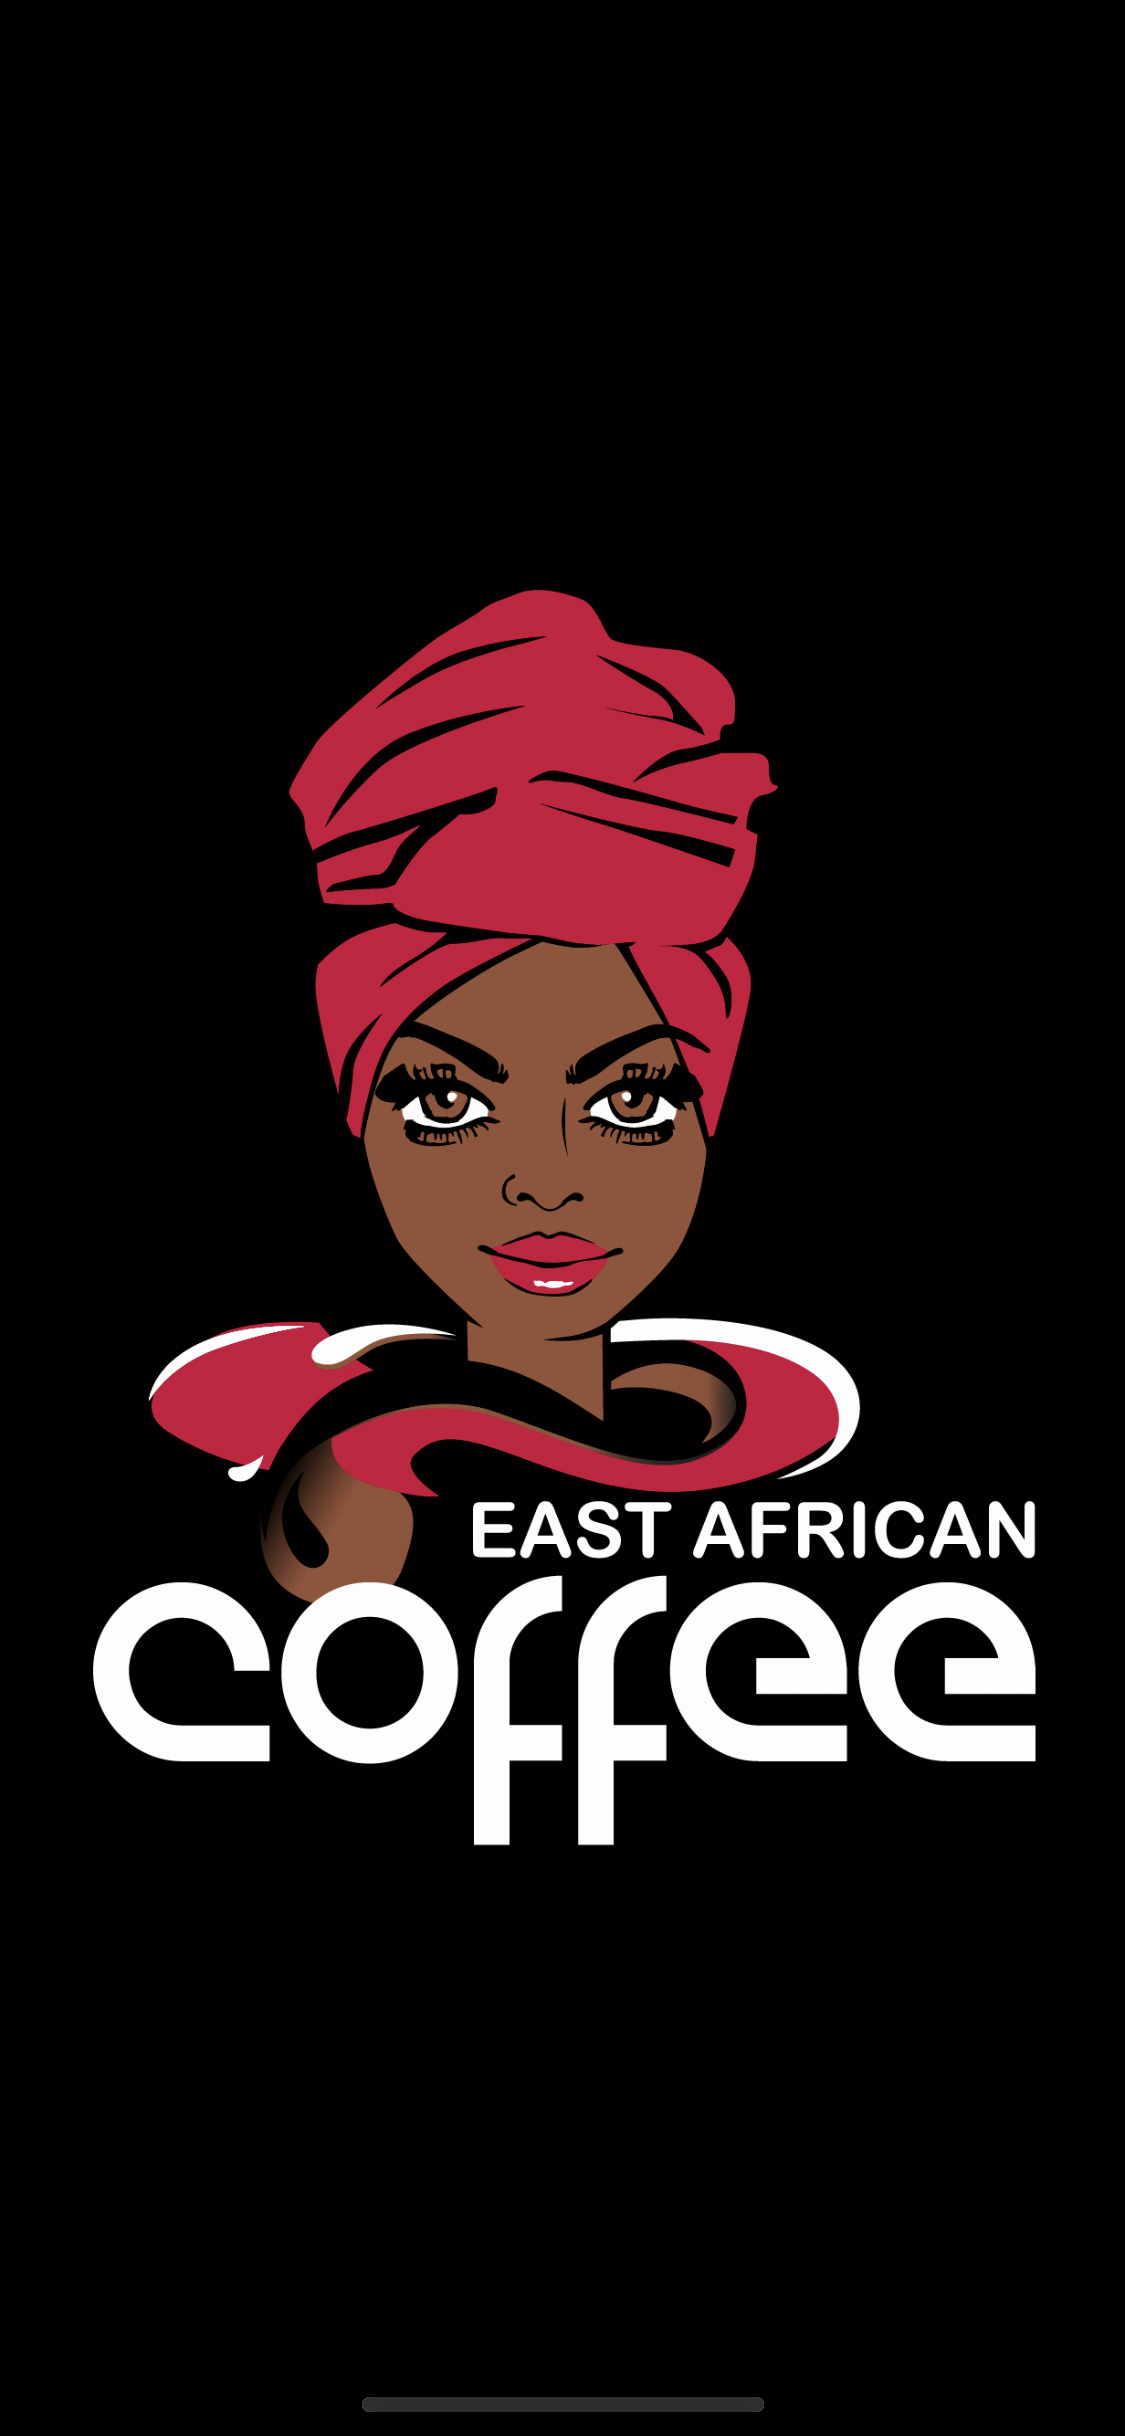 East African coffee